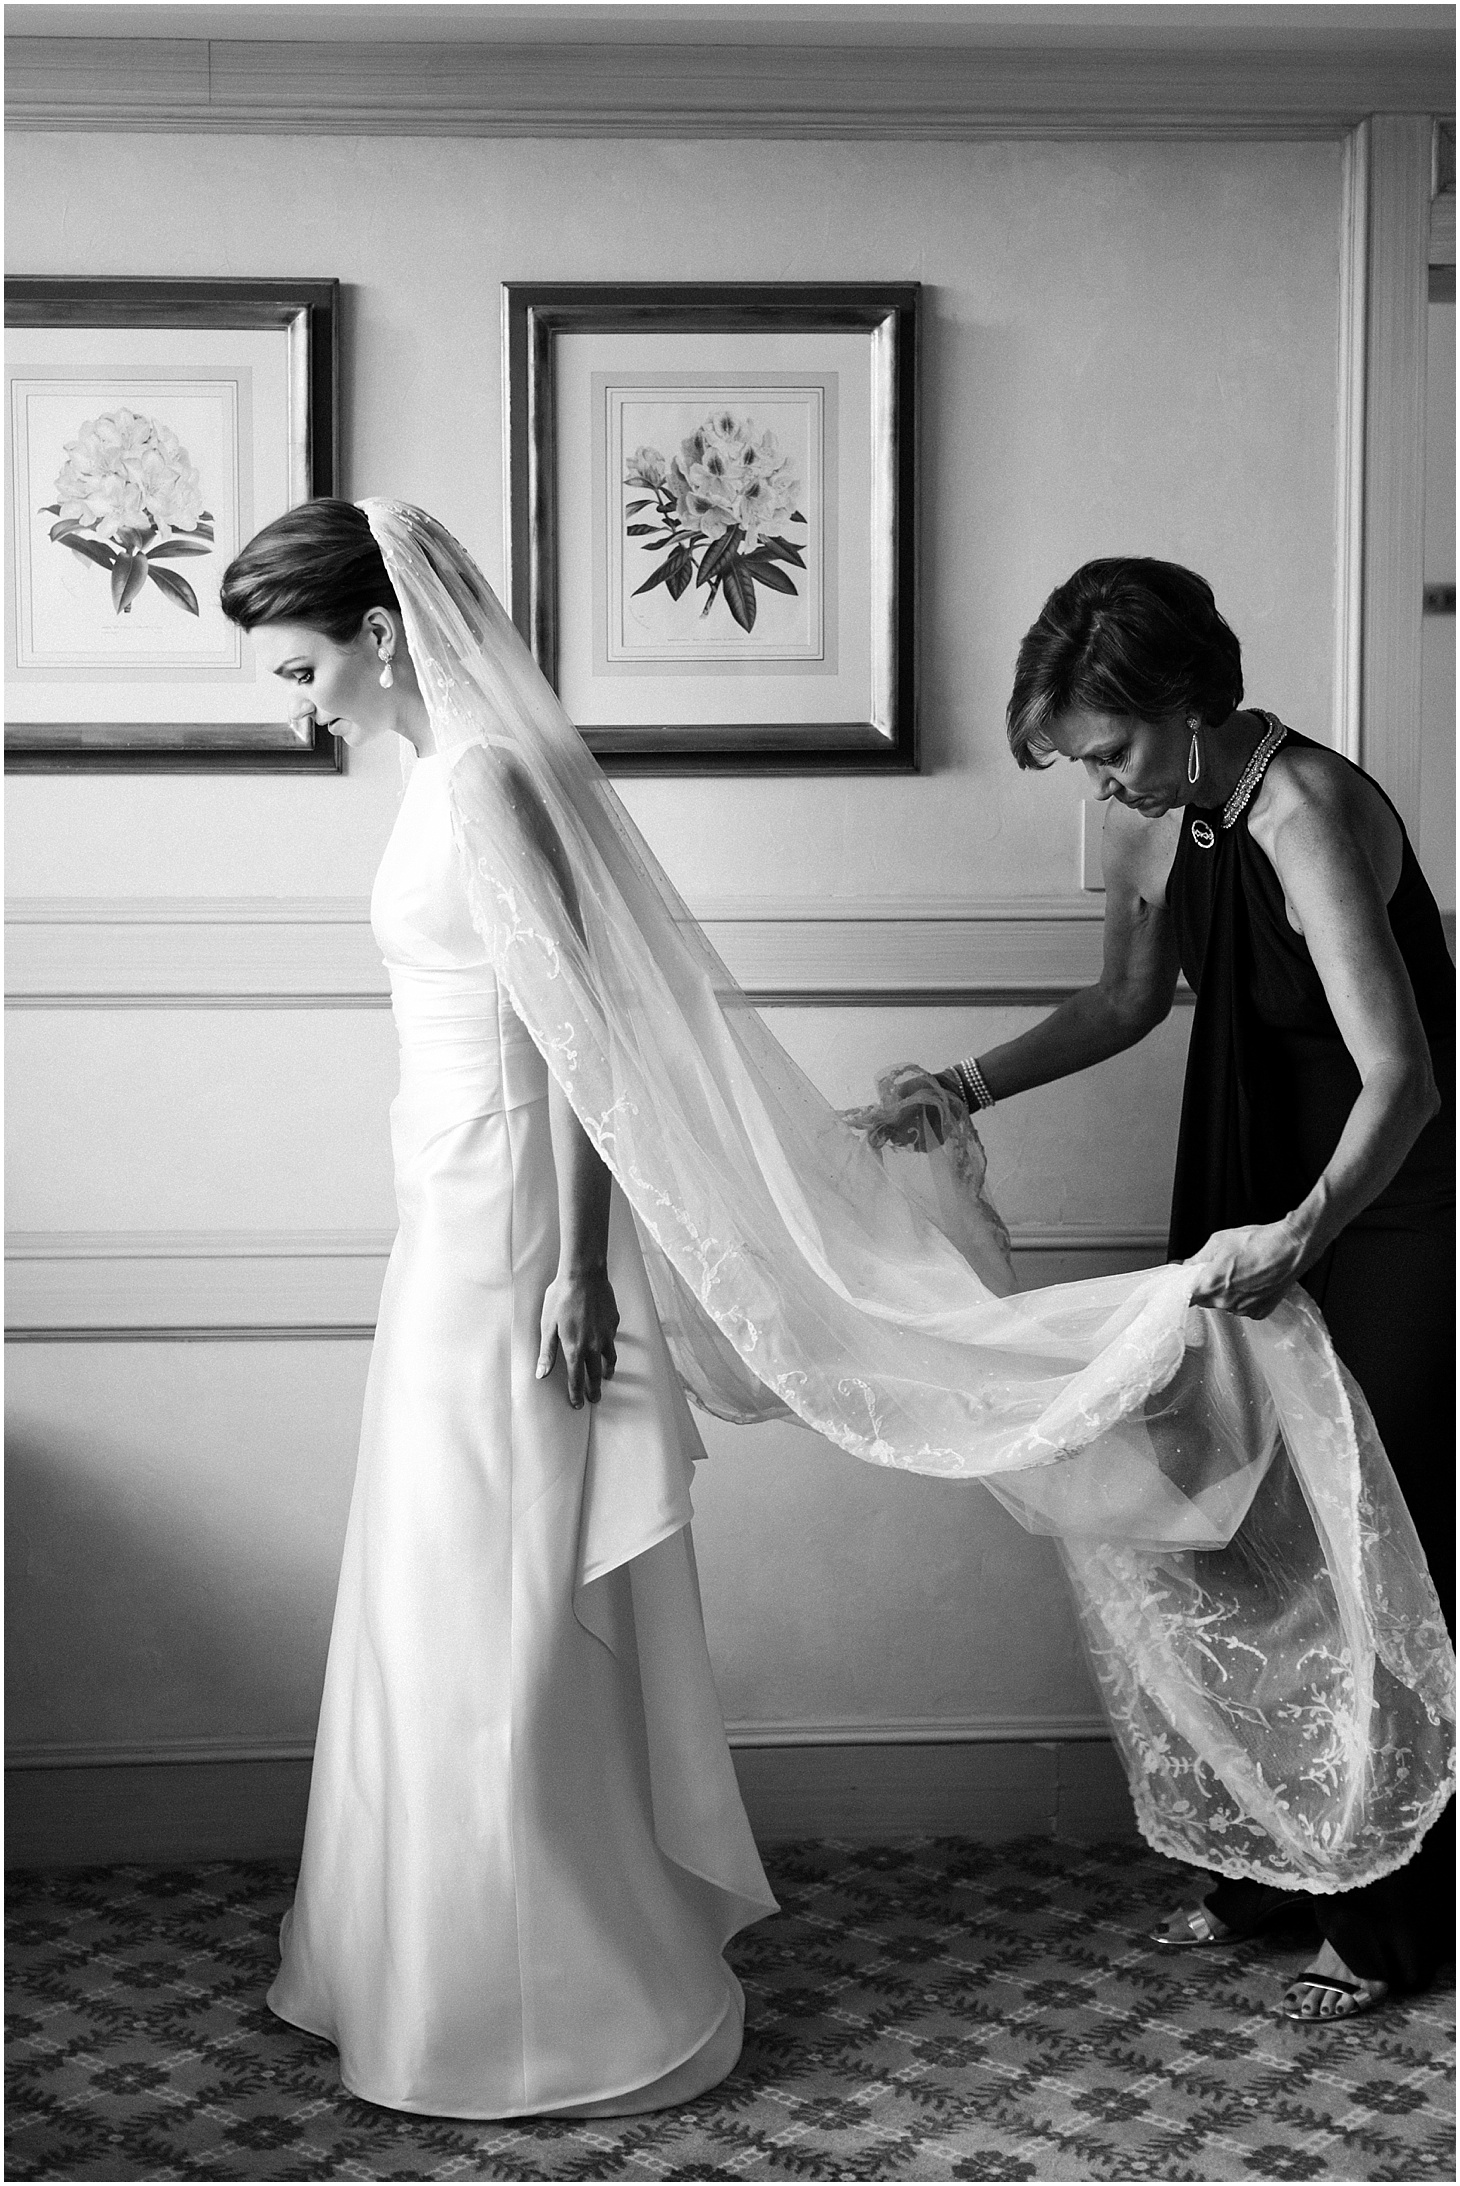 Bride Getting Ready at Columbia Country Club | Wedding Ceremony at Cathedral of St. Matthew the Apostle | Classy October Wedding in Washington, D.C. | Sarah Bradshaw Photography